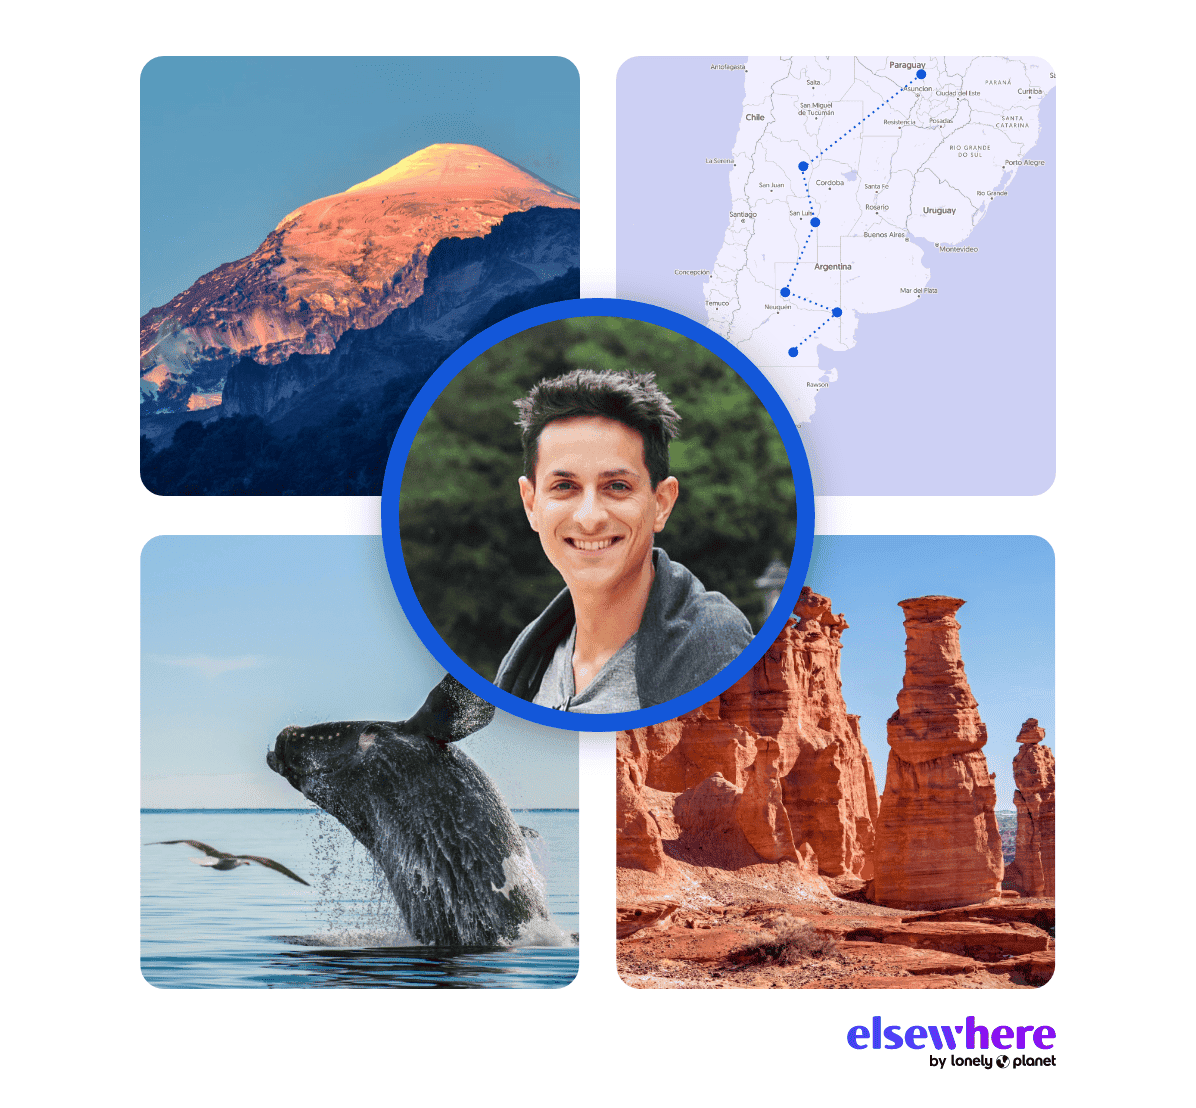 Meet with Matias, our Local Expert in Argentina